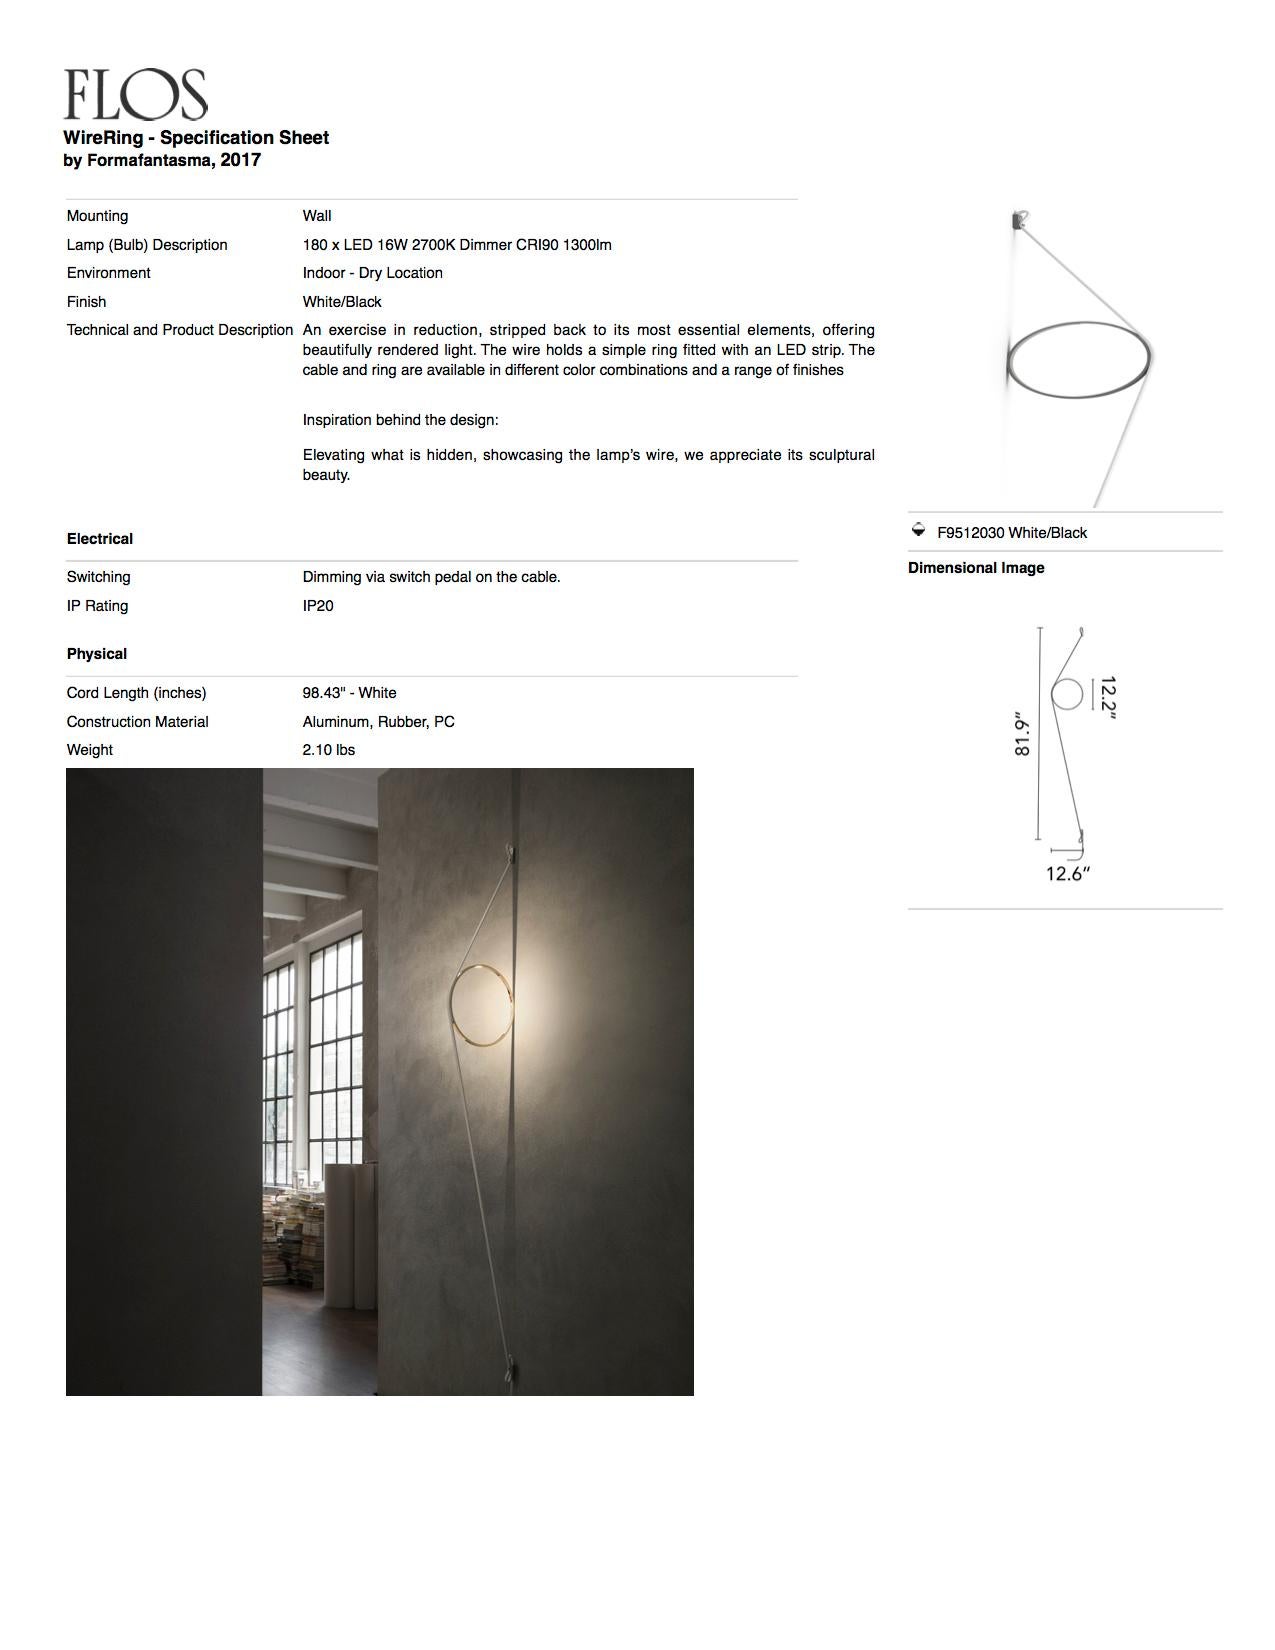 Contemporary FLOS Wirering Wall Light in Grey and Black by Formafantasma For Sale